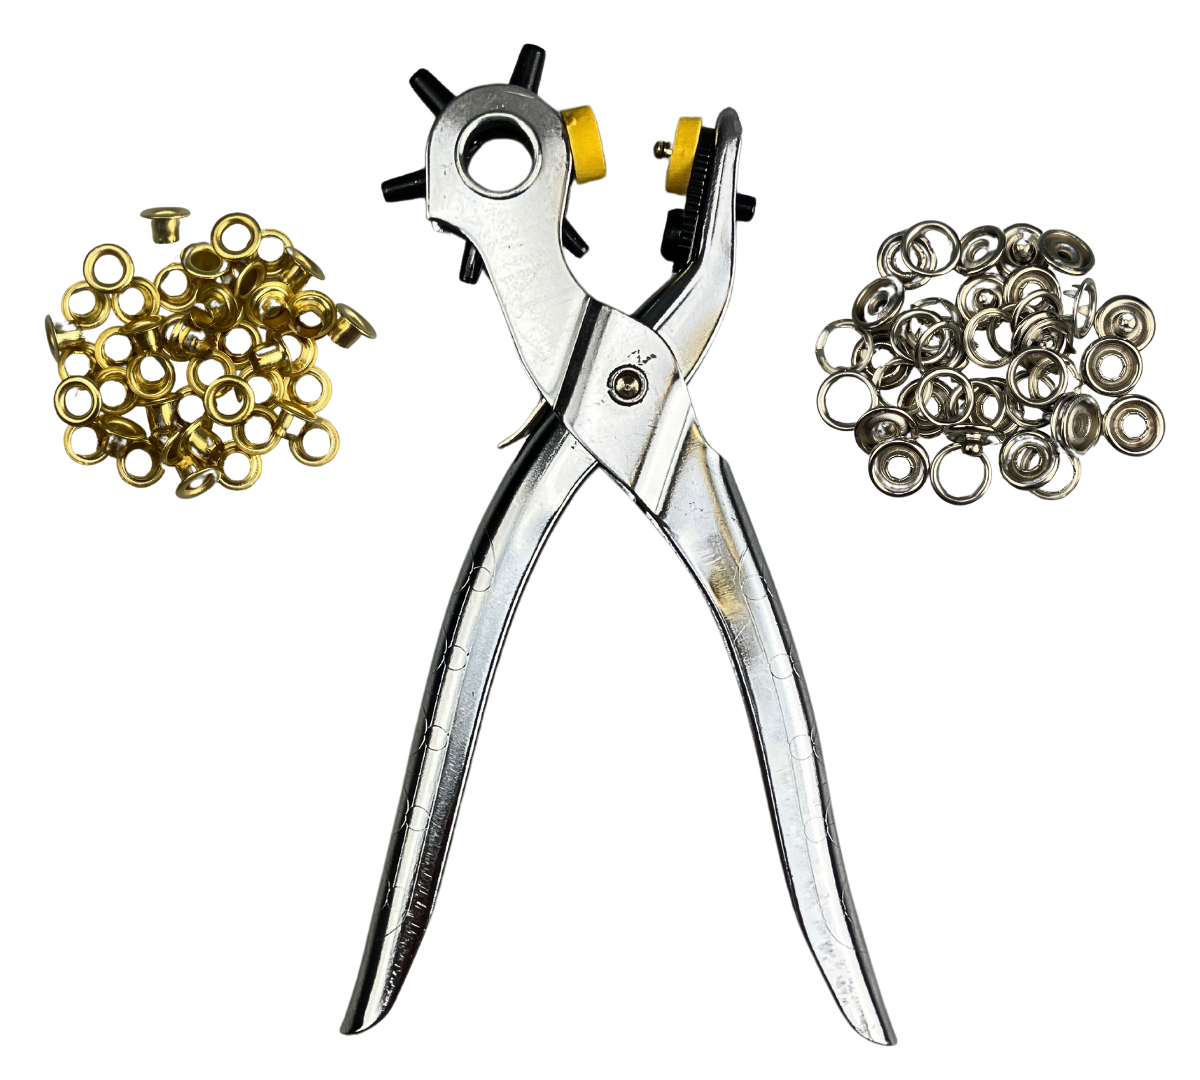 3-In-1 Plier with Hole Puncher, Snap Tool & Eyelet Maker  - TP-83106